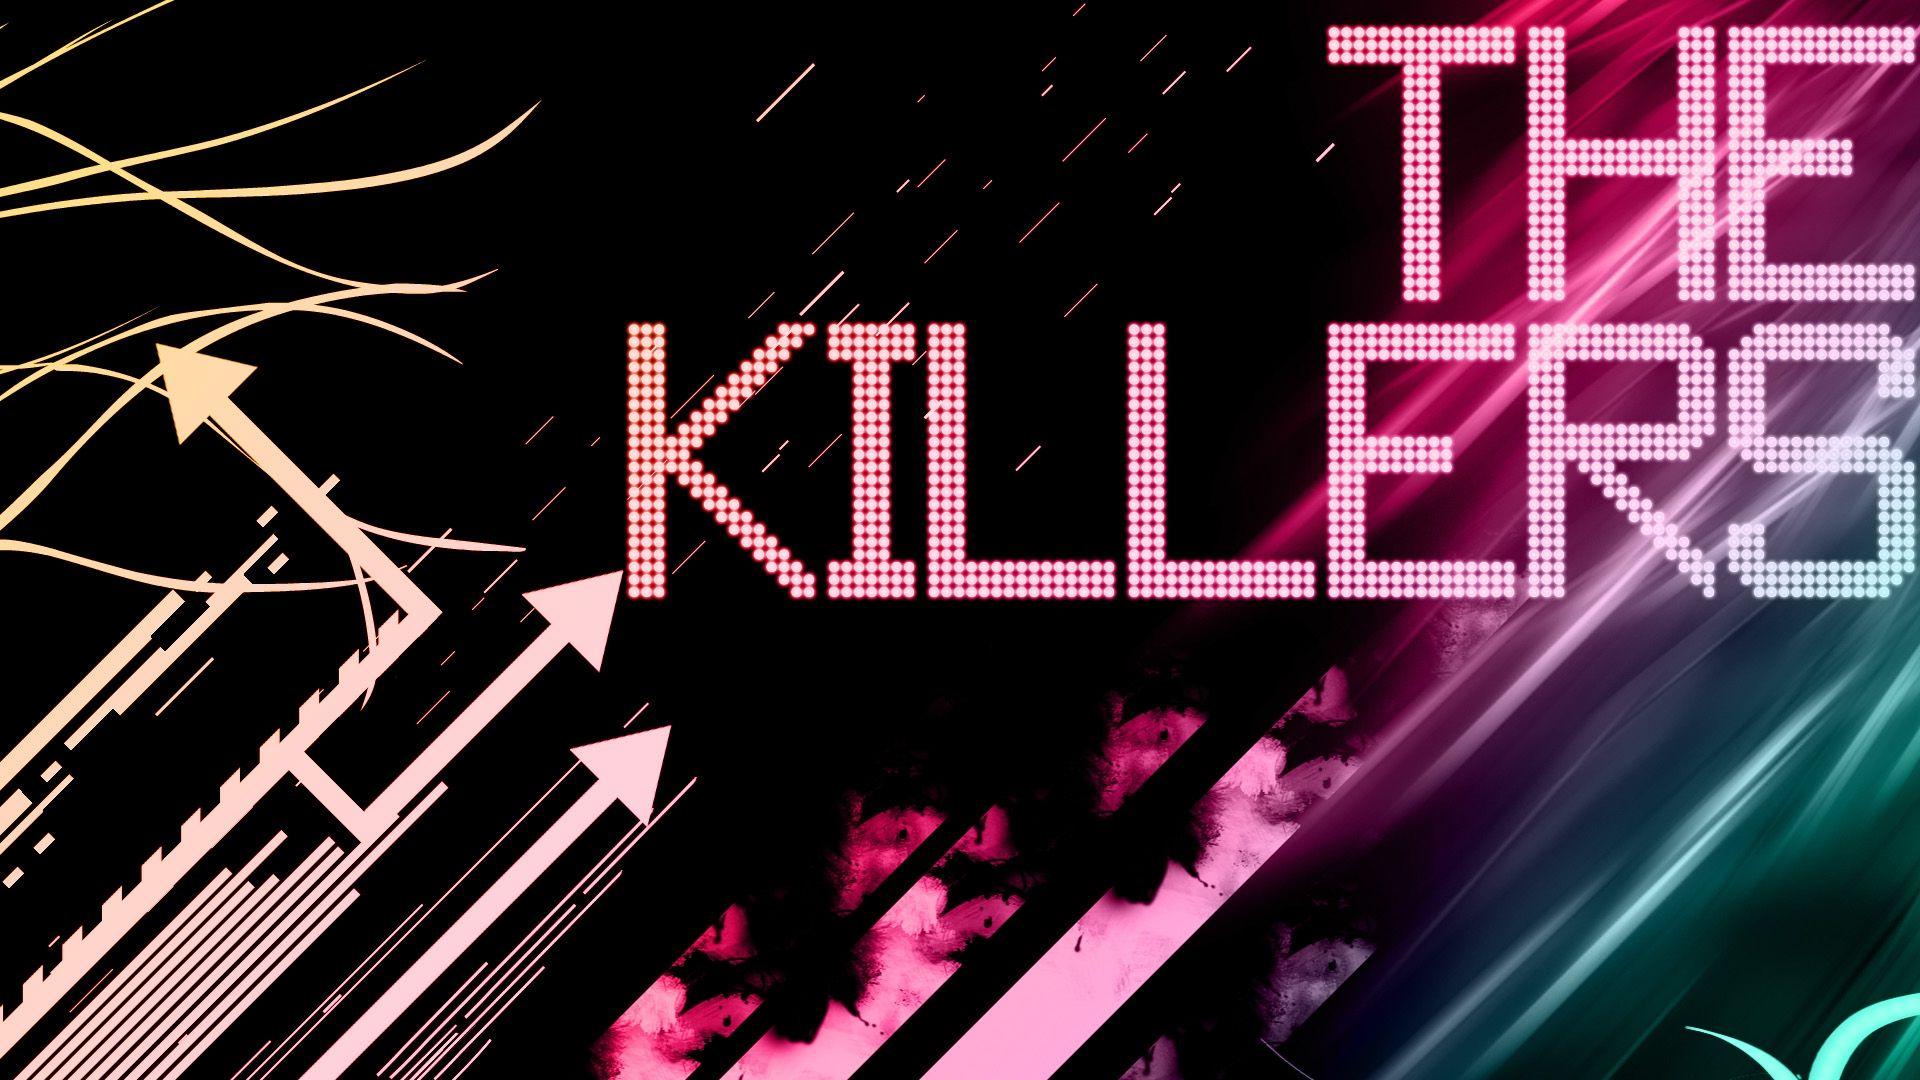 Download Wallpaper 1920x1080 The killers, Name, Graphics, Arrows